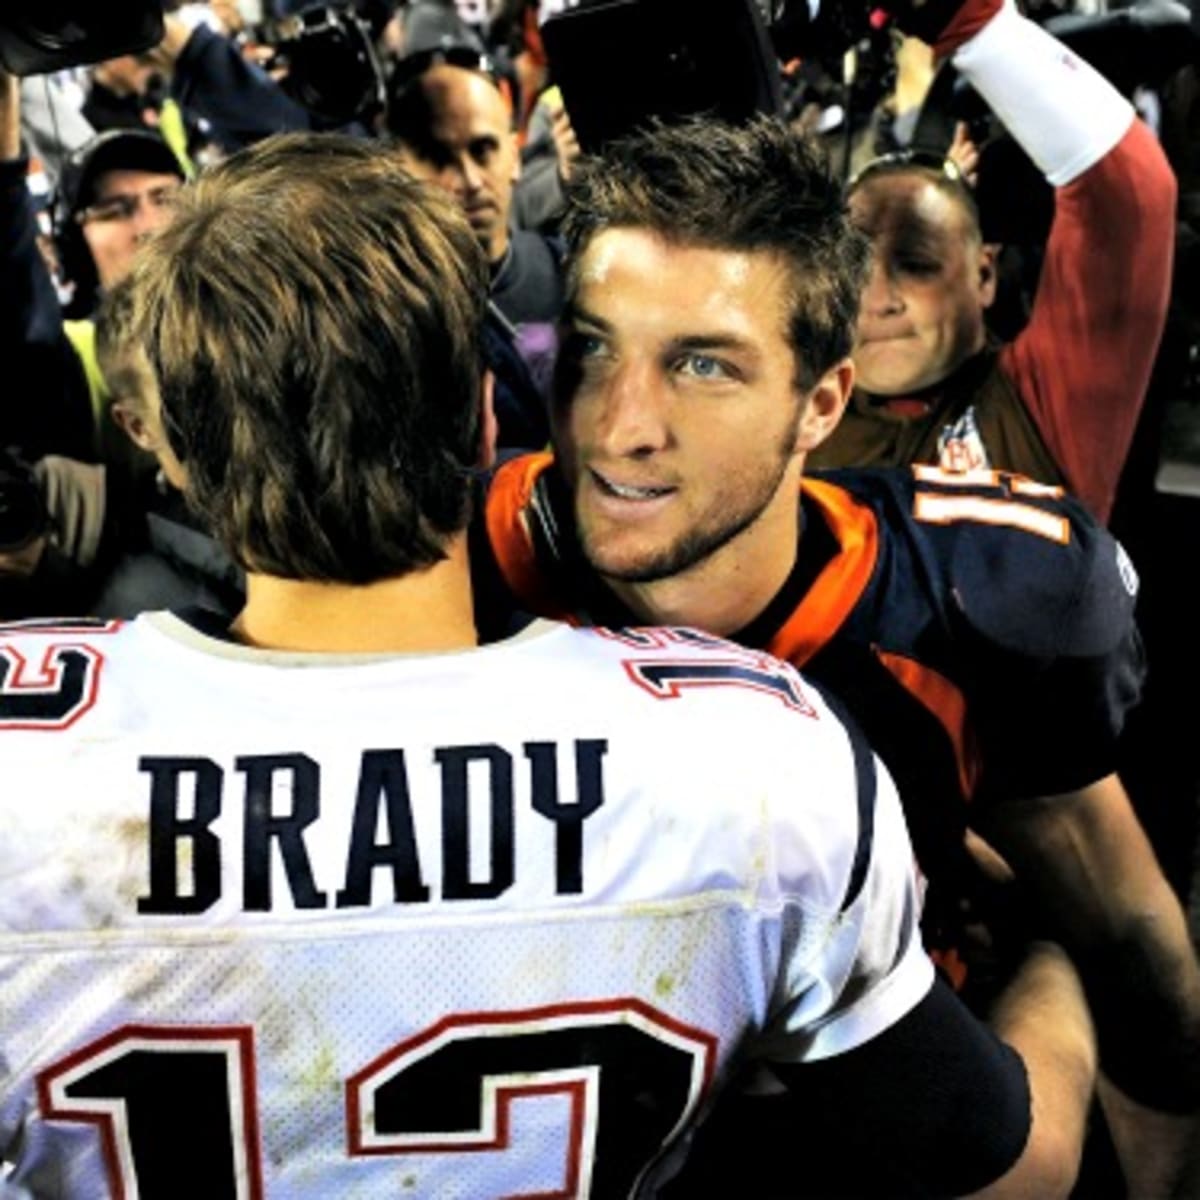 Video: Tom Brady shared concern for Aaron Hernandez with Tim Tebow